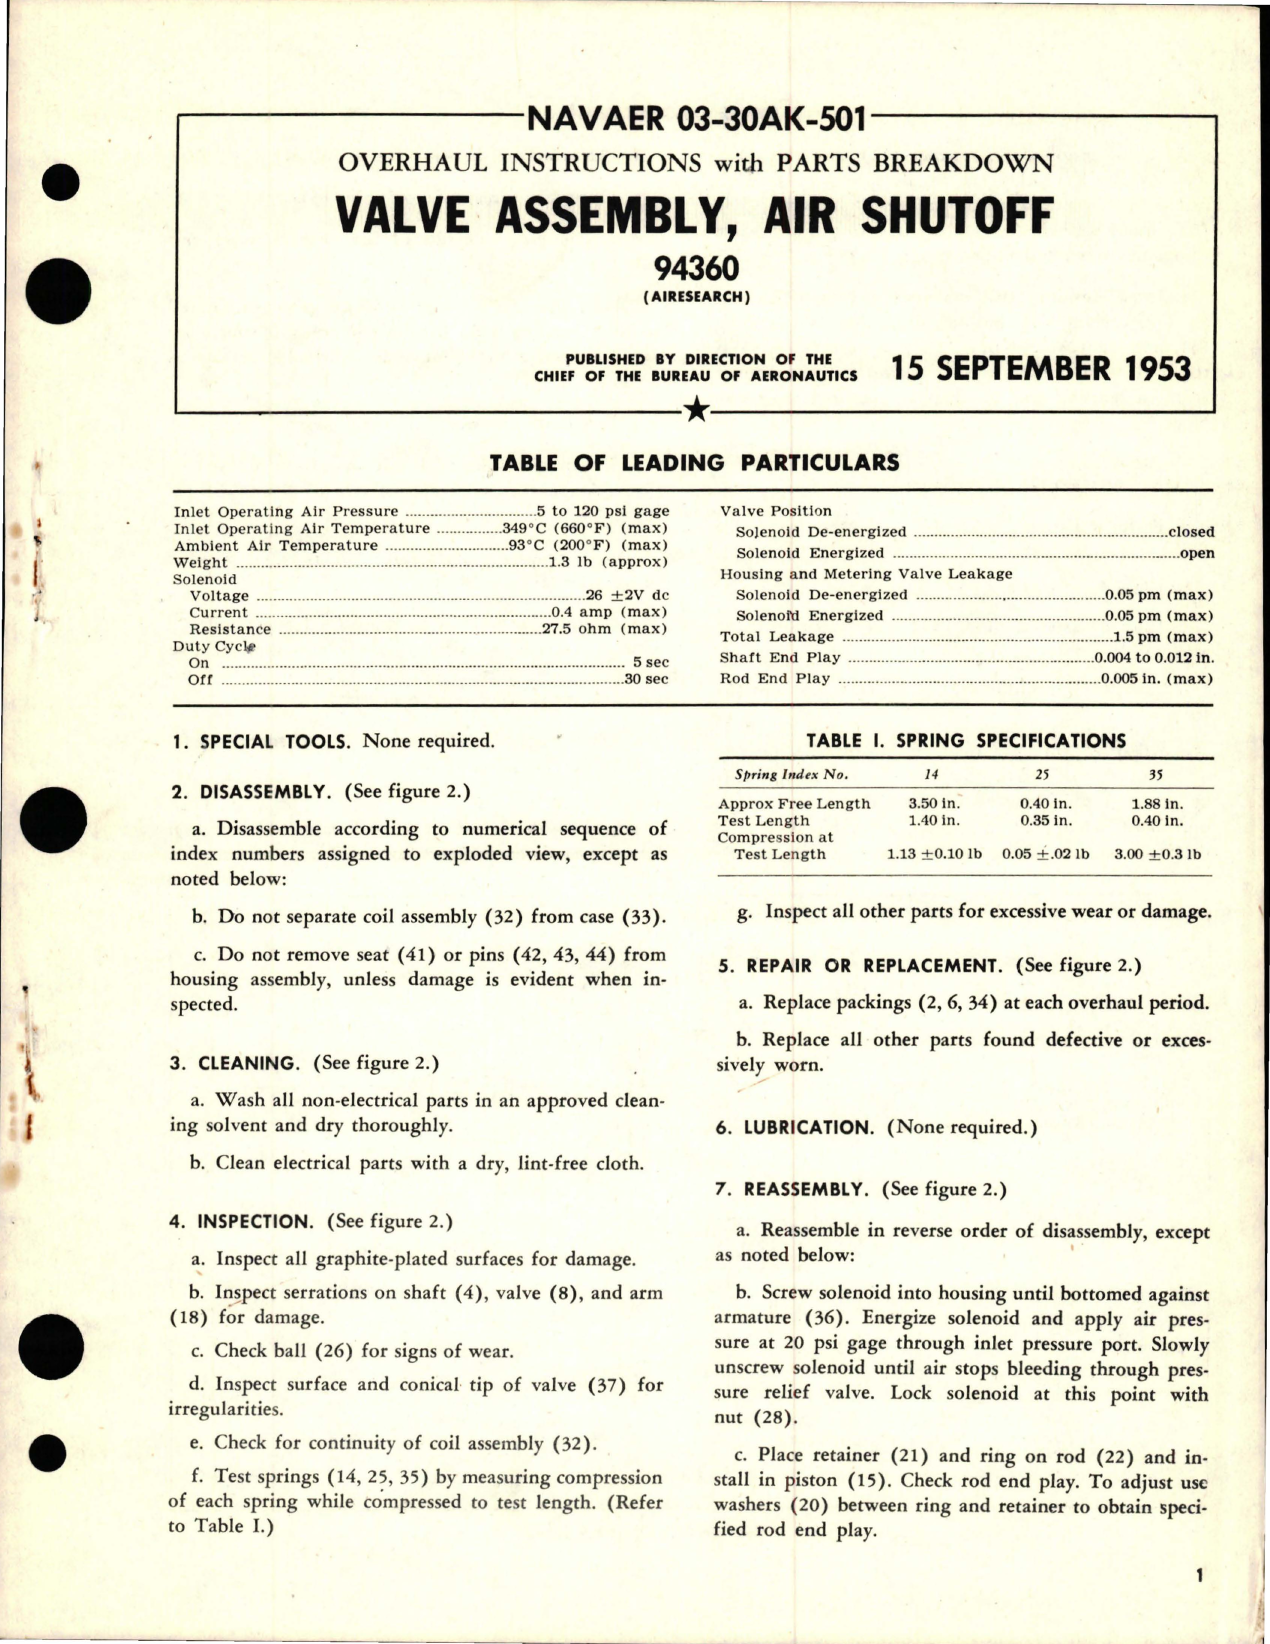 Sample page 1 from AirCorps Library document: Overhaul Instructions with Parts Breakdown for Air Shutoff Valve Assembly - 94360 